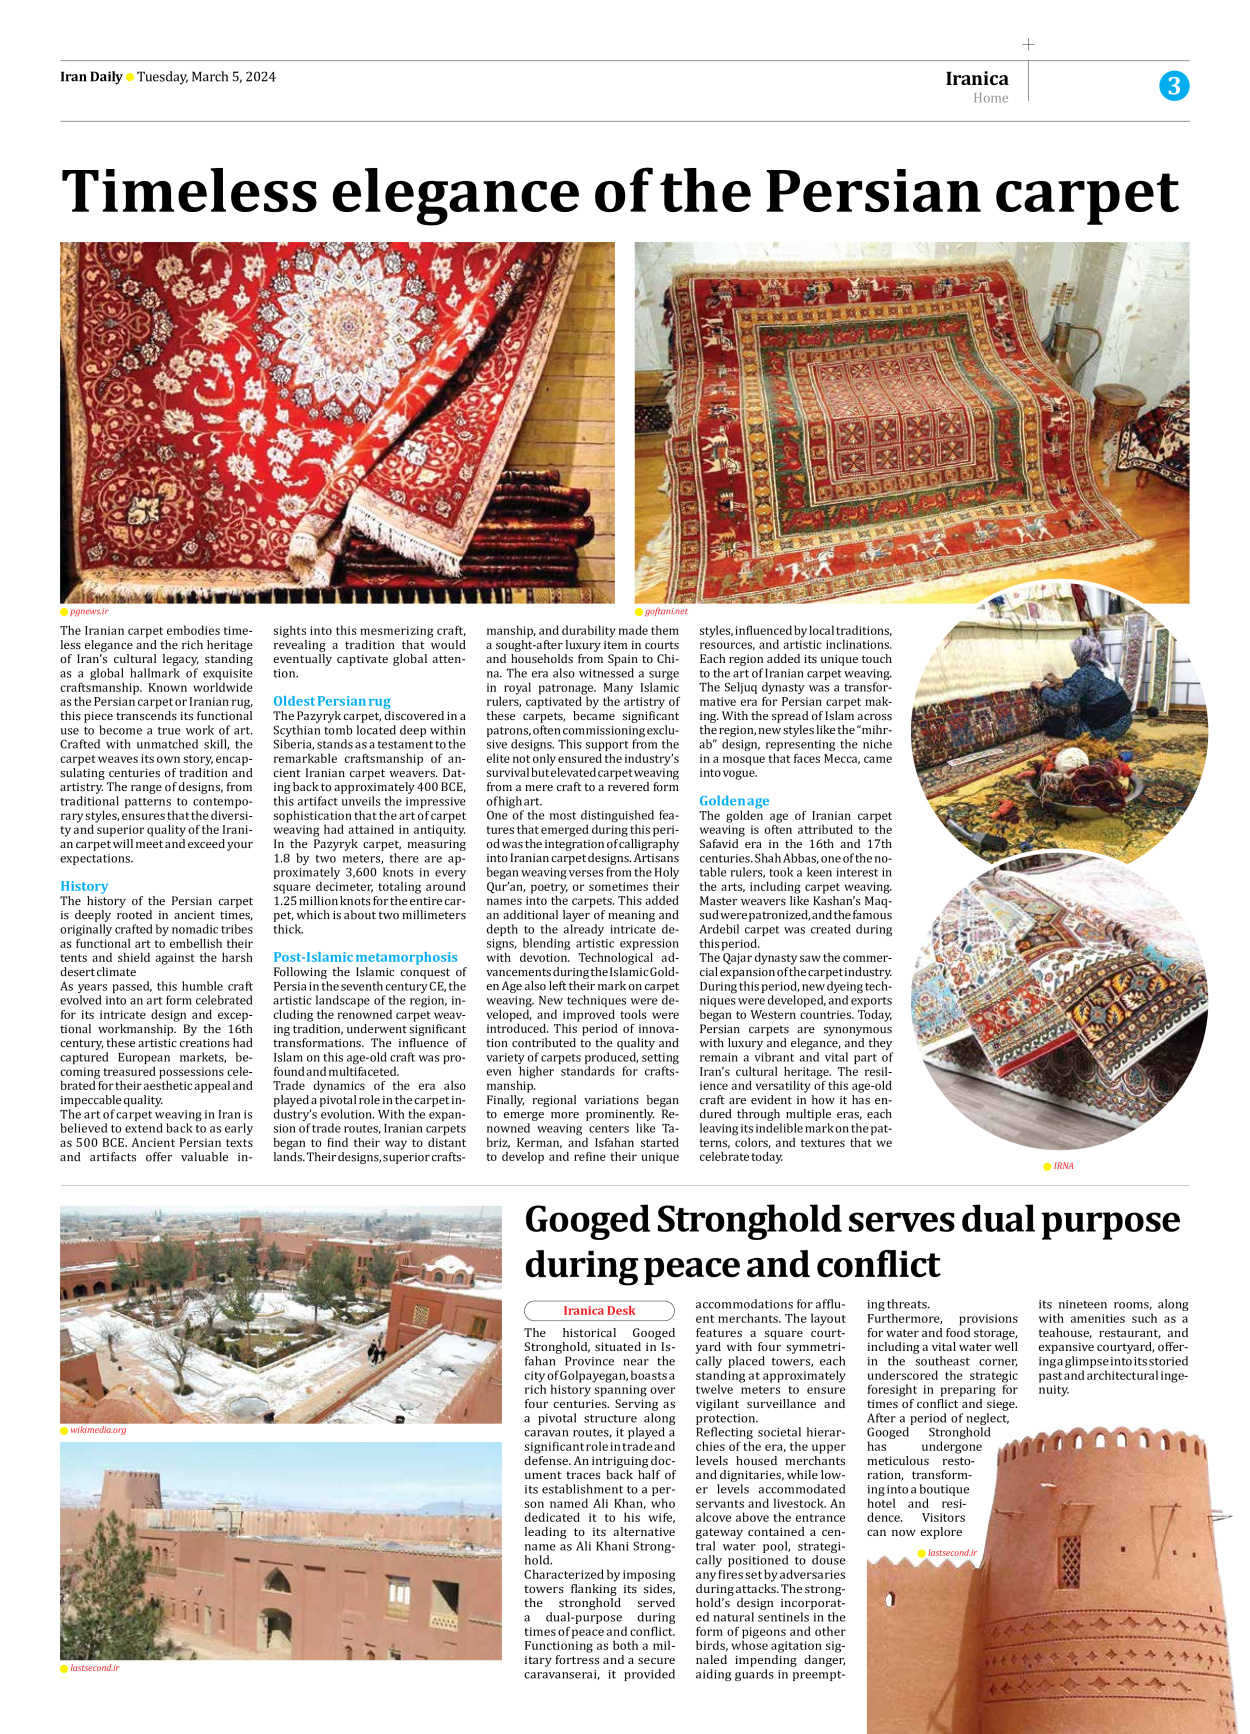 Iran Daily - Number Seven Thousand Five Hundred and Twenty Two - 05 March 2024 - Page 3